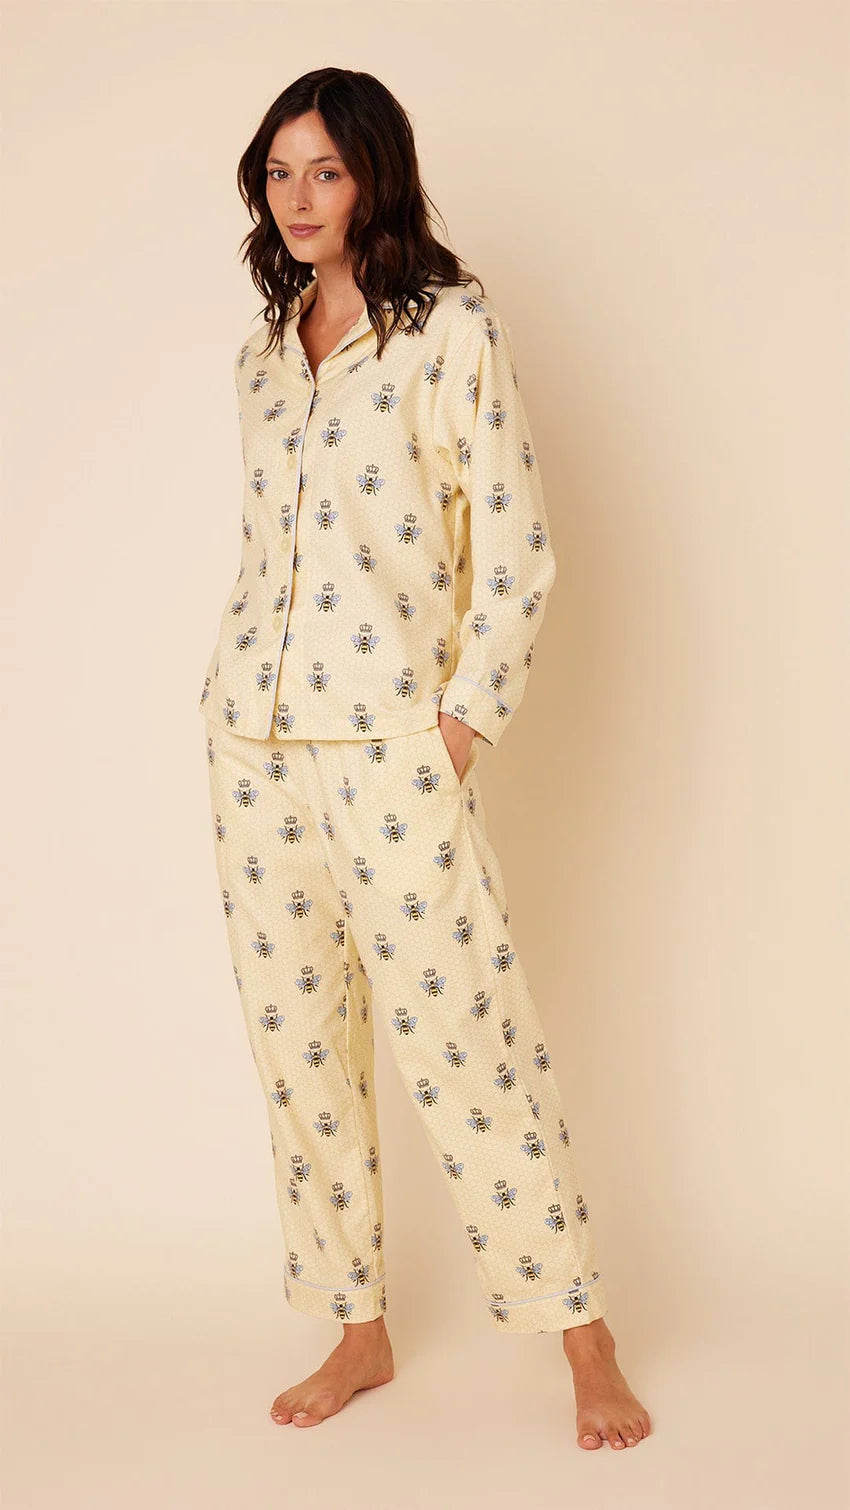 Queen Bee Flannel Pajama by The Cat's Pajamas